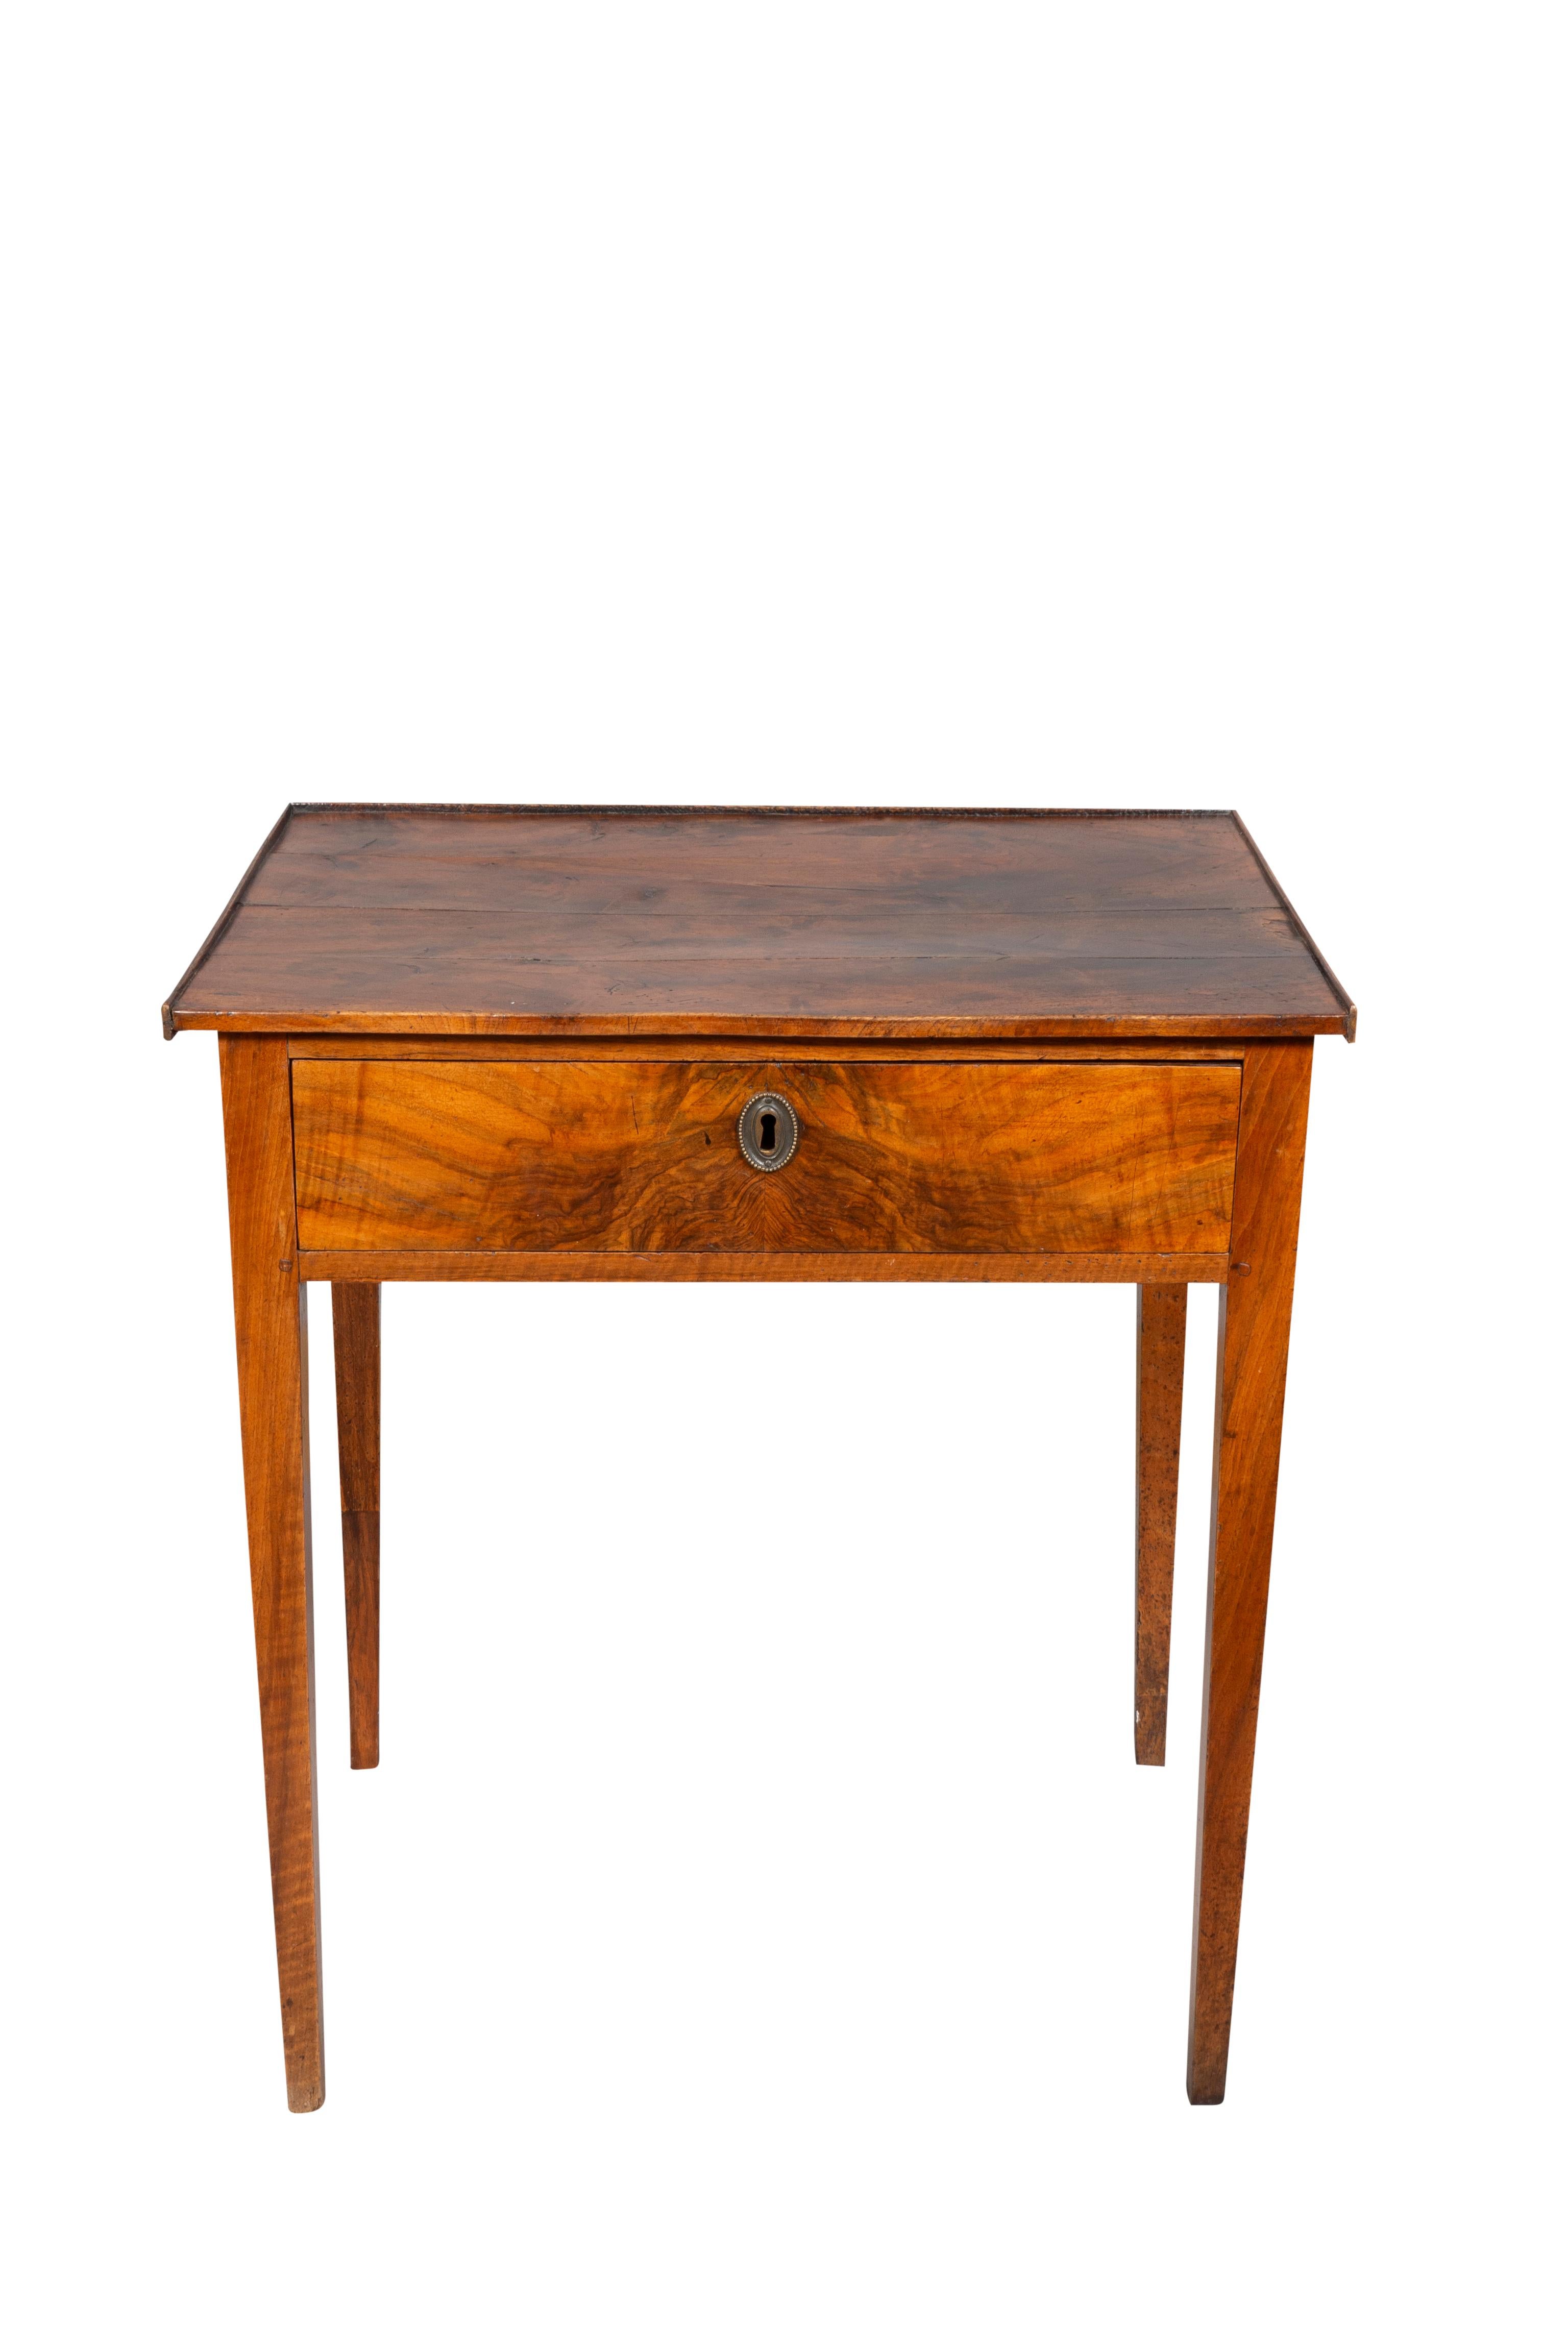 With a rectangular top over a drawer raised on square tapered legs.